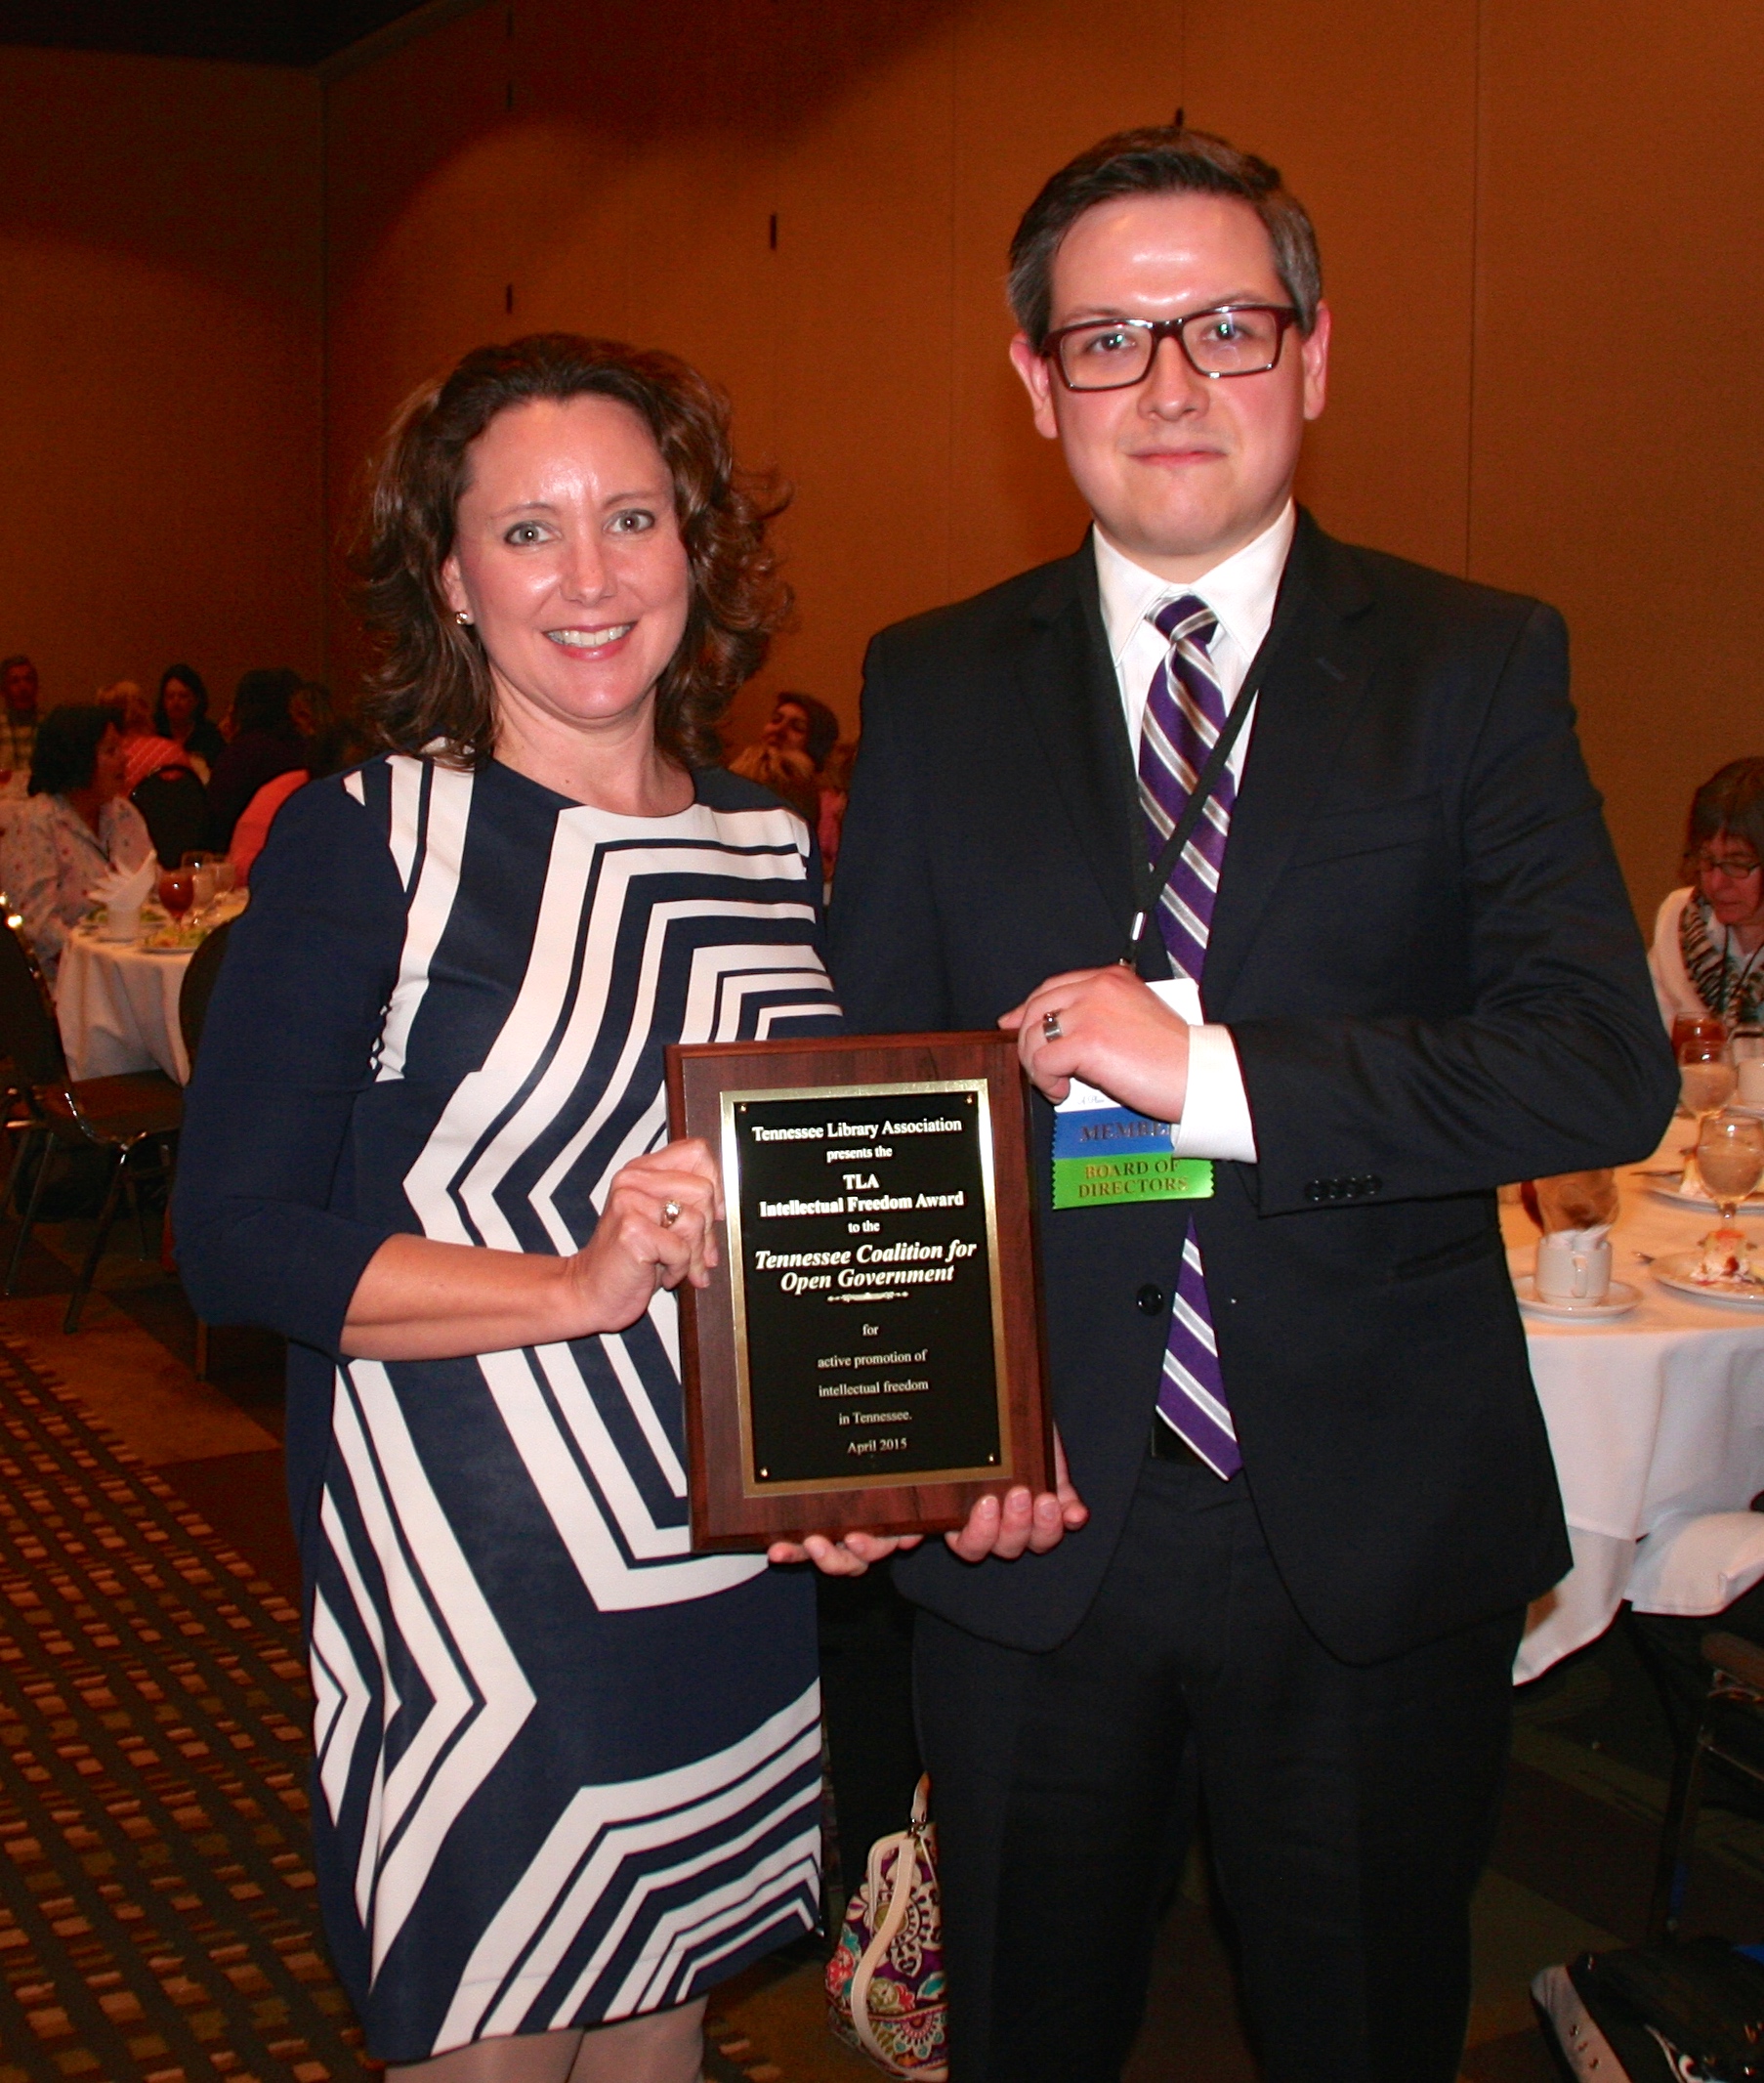 Anthony Prince with the Tennessee Library Association presents TCOG's executive director with TLA's Intellectual Freedom Award at TLA's 2015 conference in Memphis.